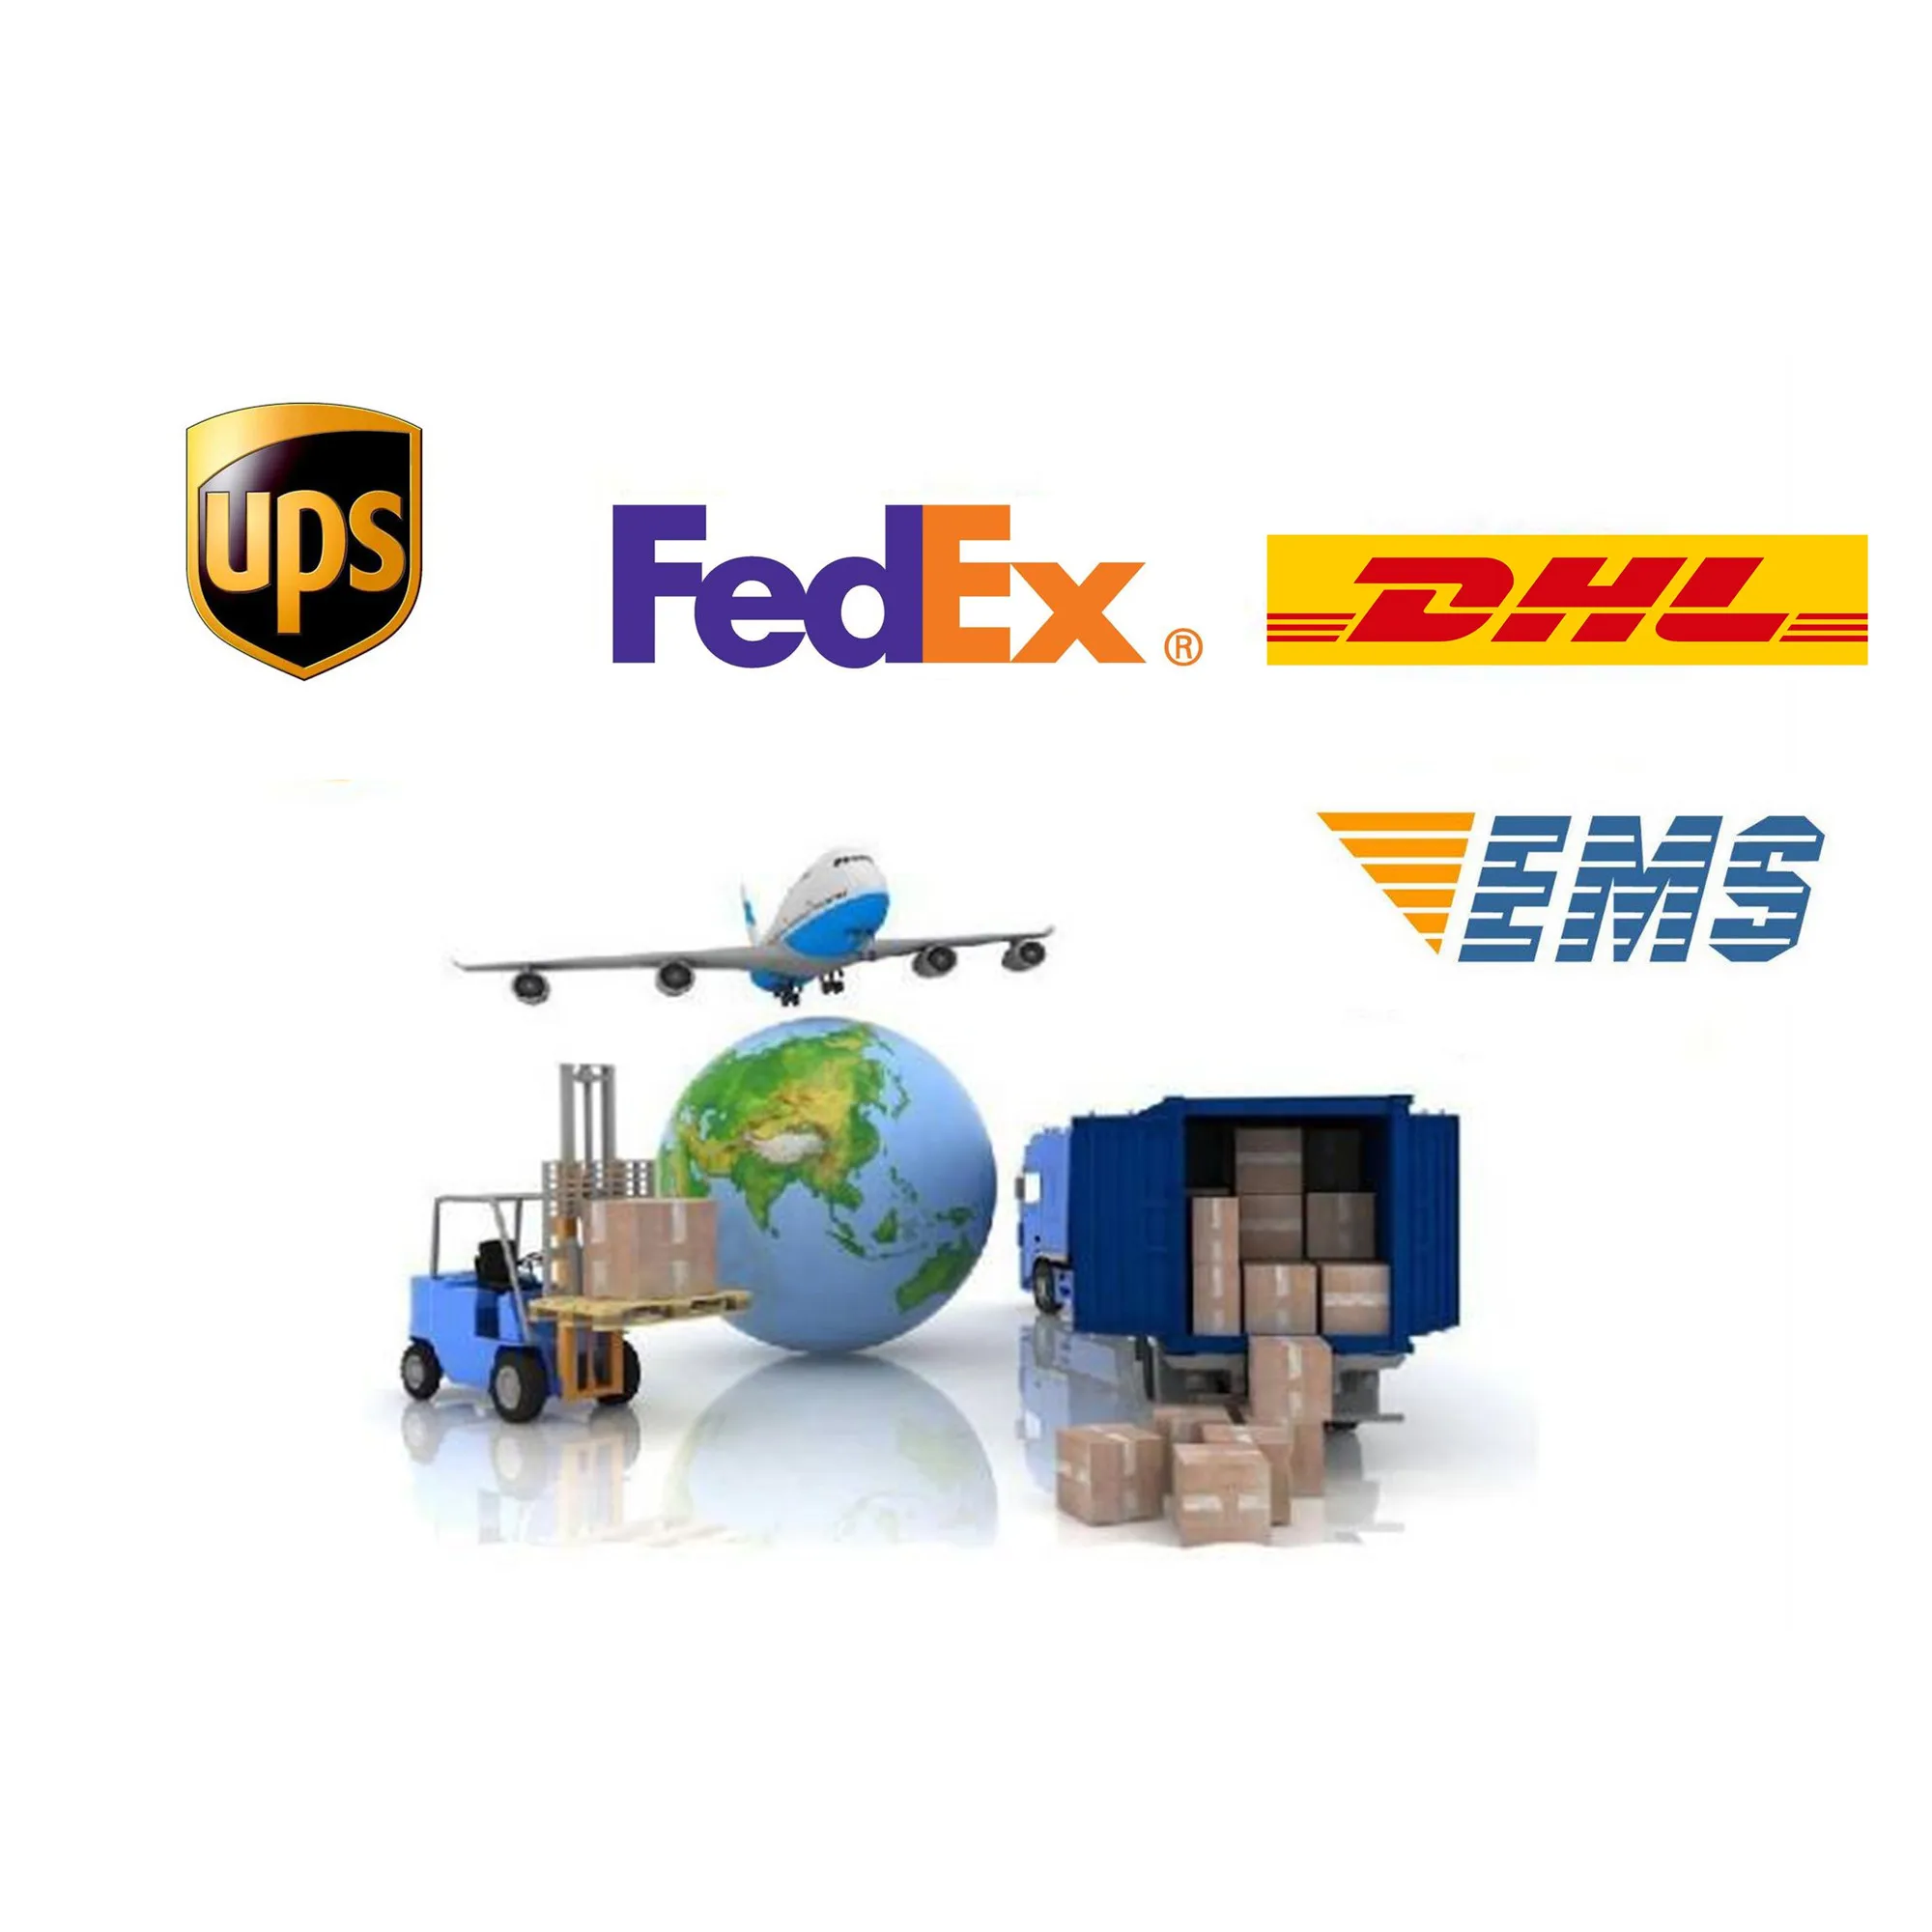 Do not take orders, this Link to Freight Difference